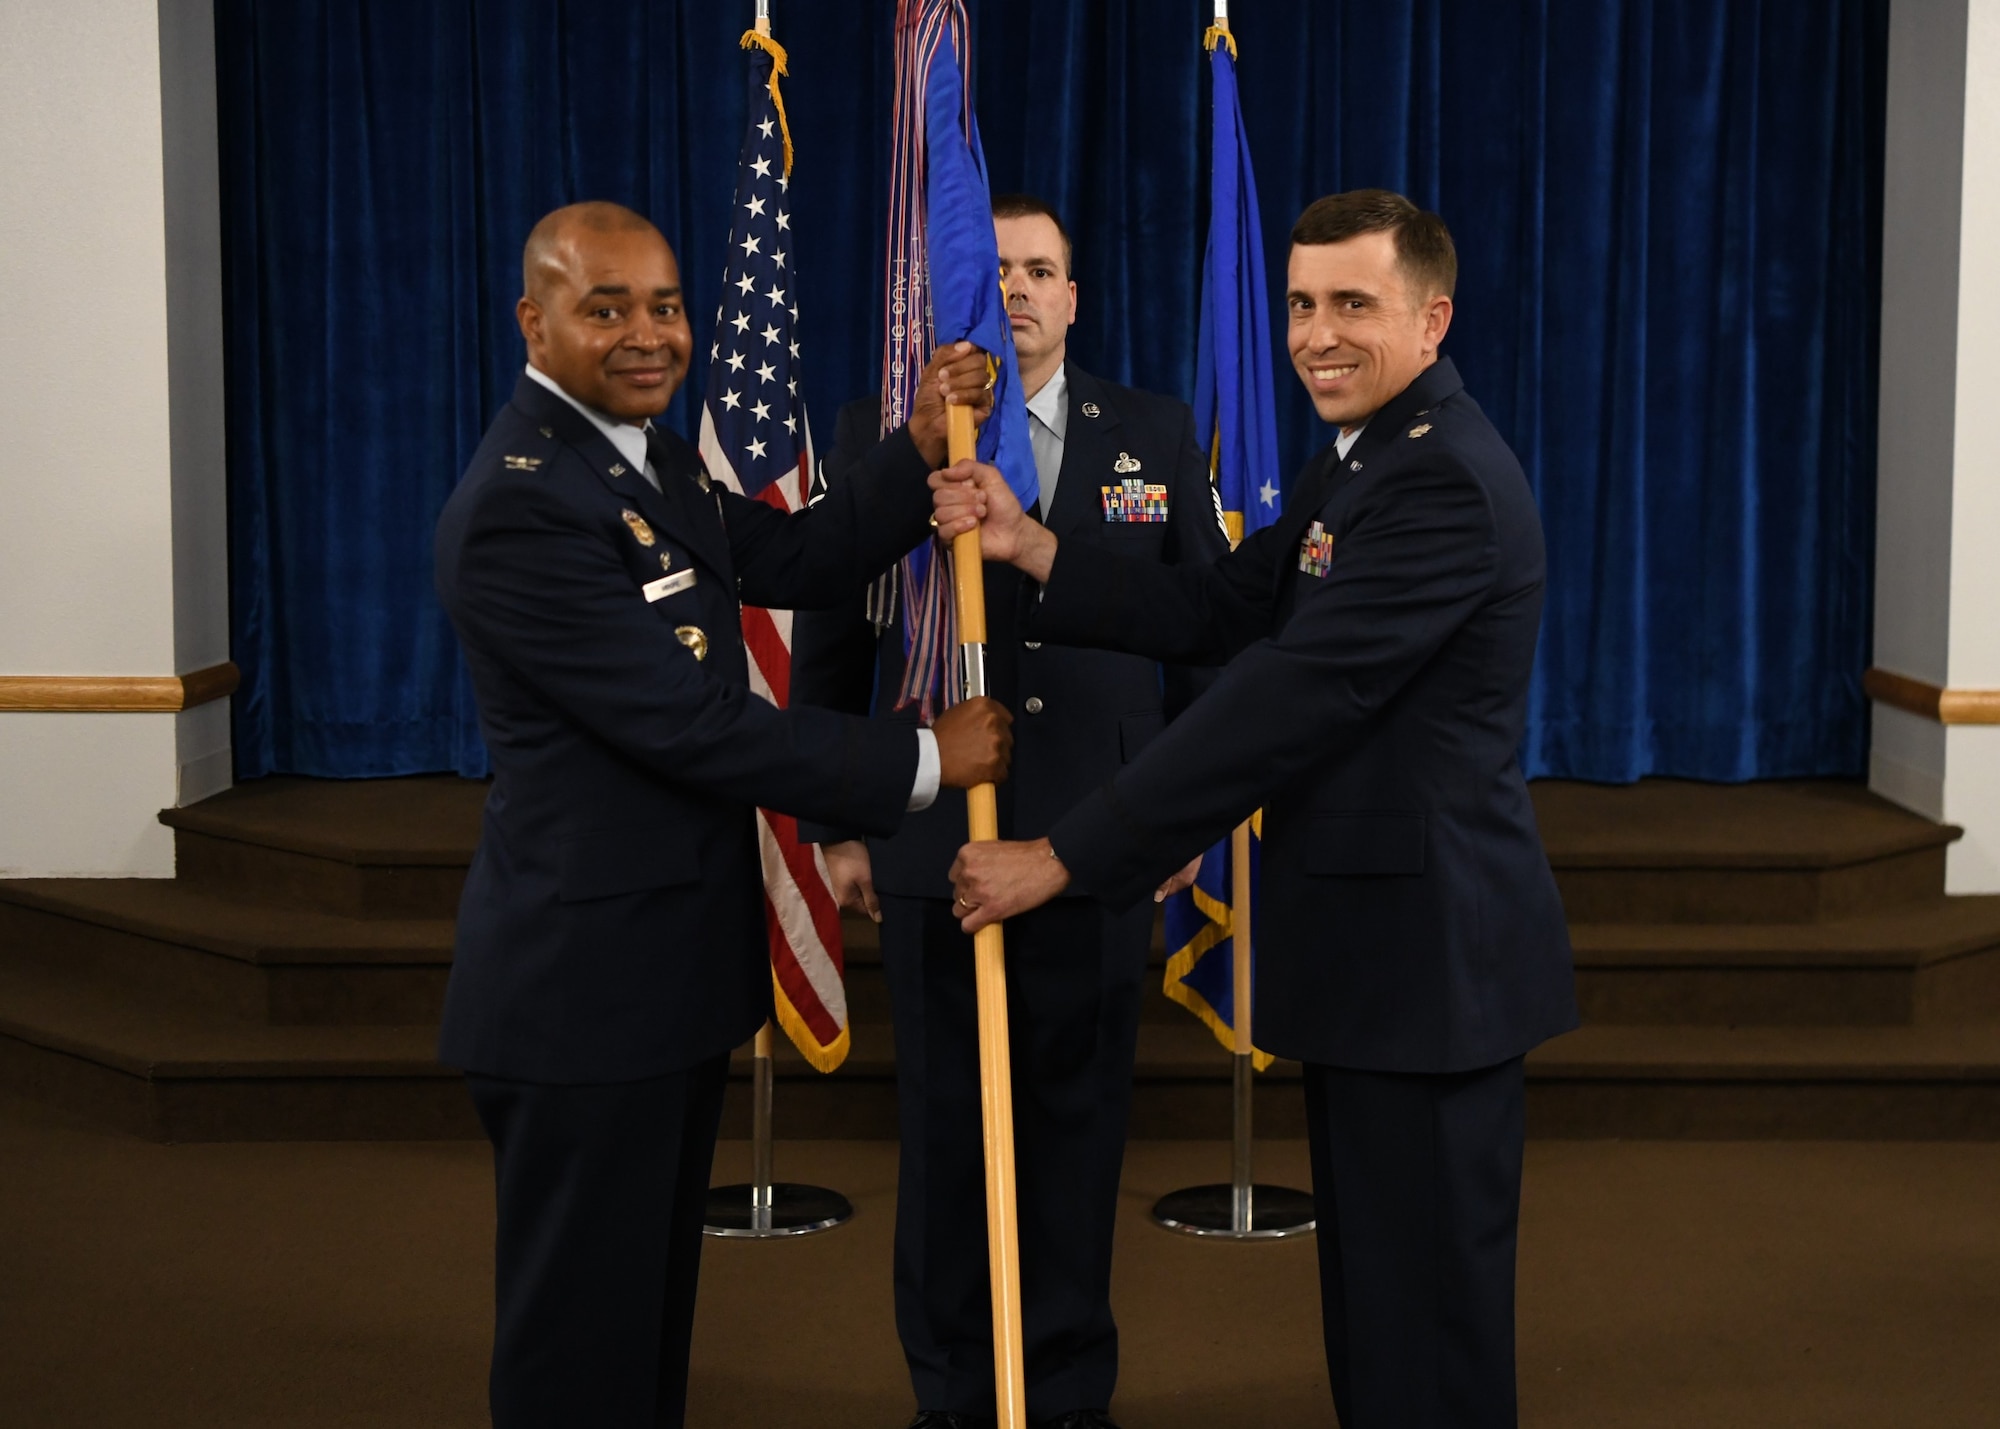 Col. Tytonia Moore, commander of the 90th Operations Group (left), passes the guidon to Lt. Col. Jared Bishop, the incoming commander of the 319th Missile Squadron, during a change of command ceremony on F.E. Warren Air Force Base, June 14, 2022. The change of command ceremony signifies the transition of command from Lt. Col. Robert Mack, the outgoing commander of 319 MS, to Bishop. (U.S. Air Force photo by Airman 1st Class Faith Iris Macilvaine)